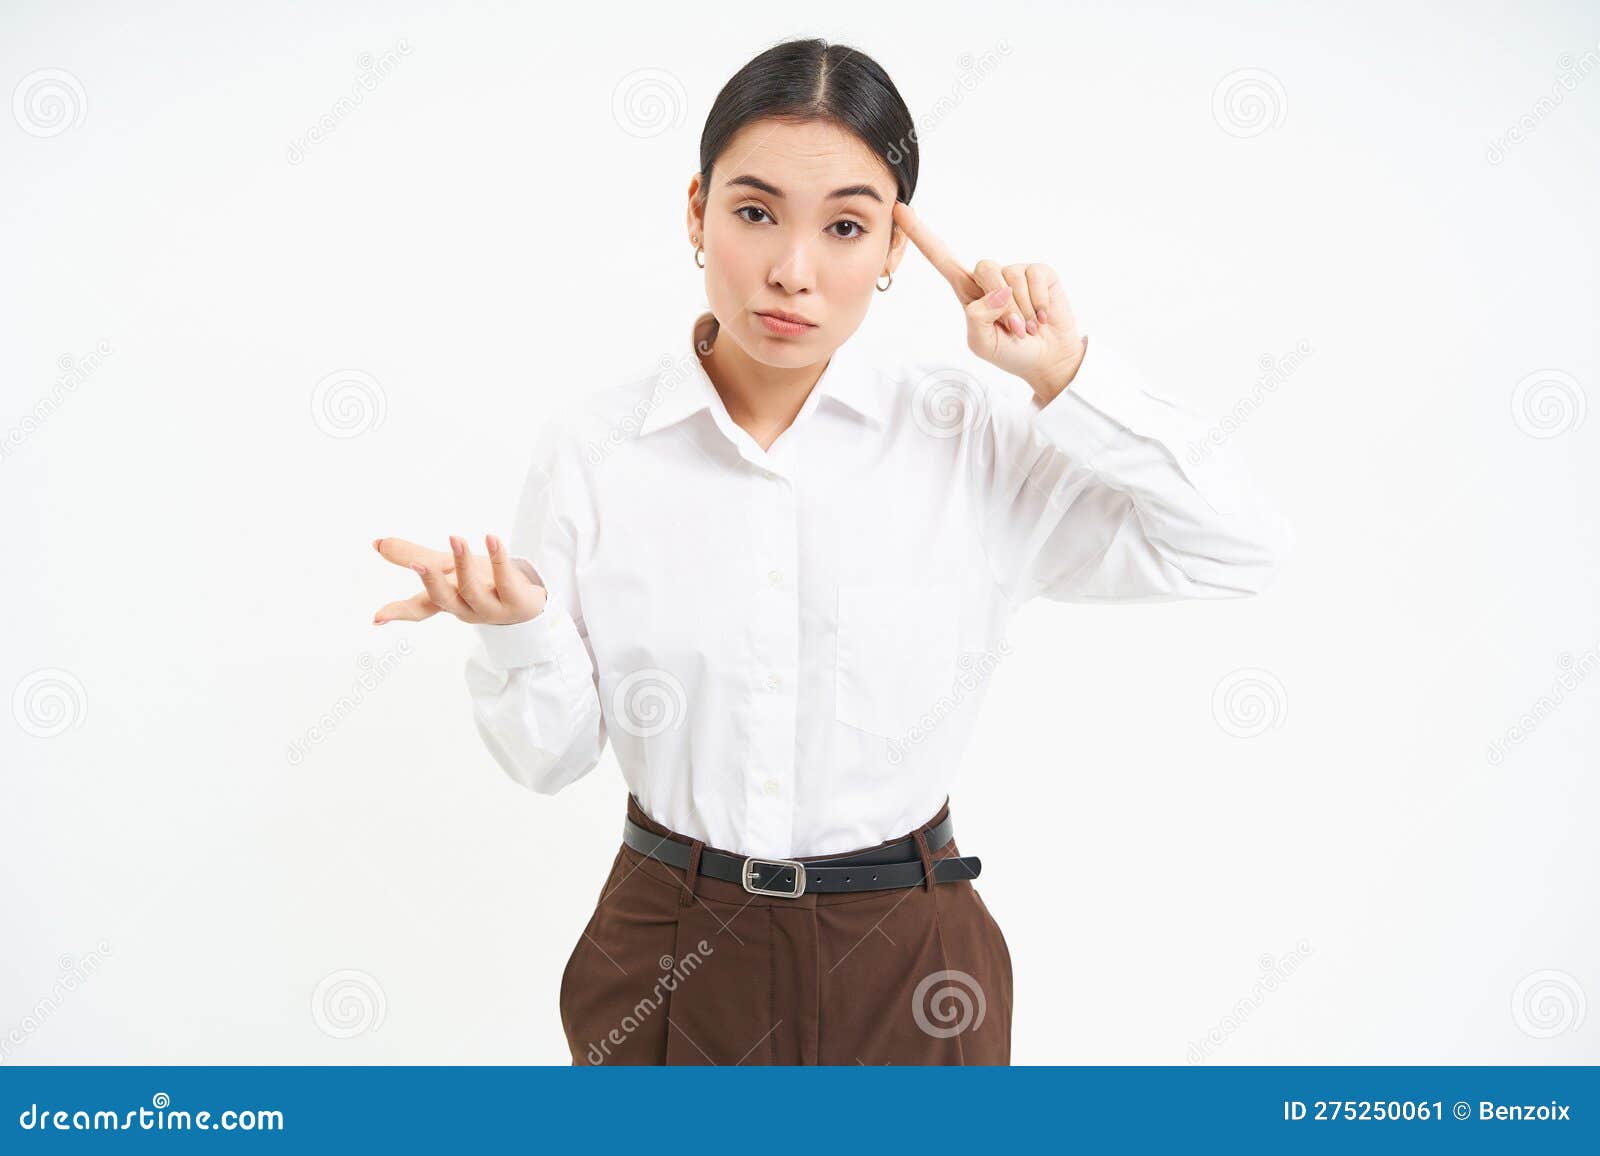 corporate woman looks annoyed, points finger at head, mocks someone, scolding person, white background